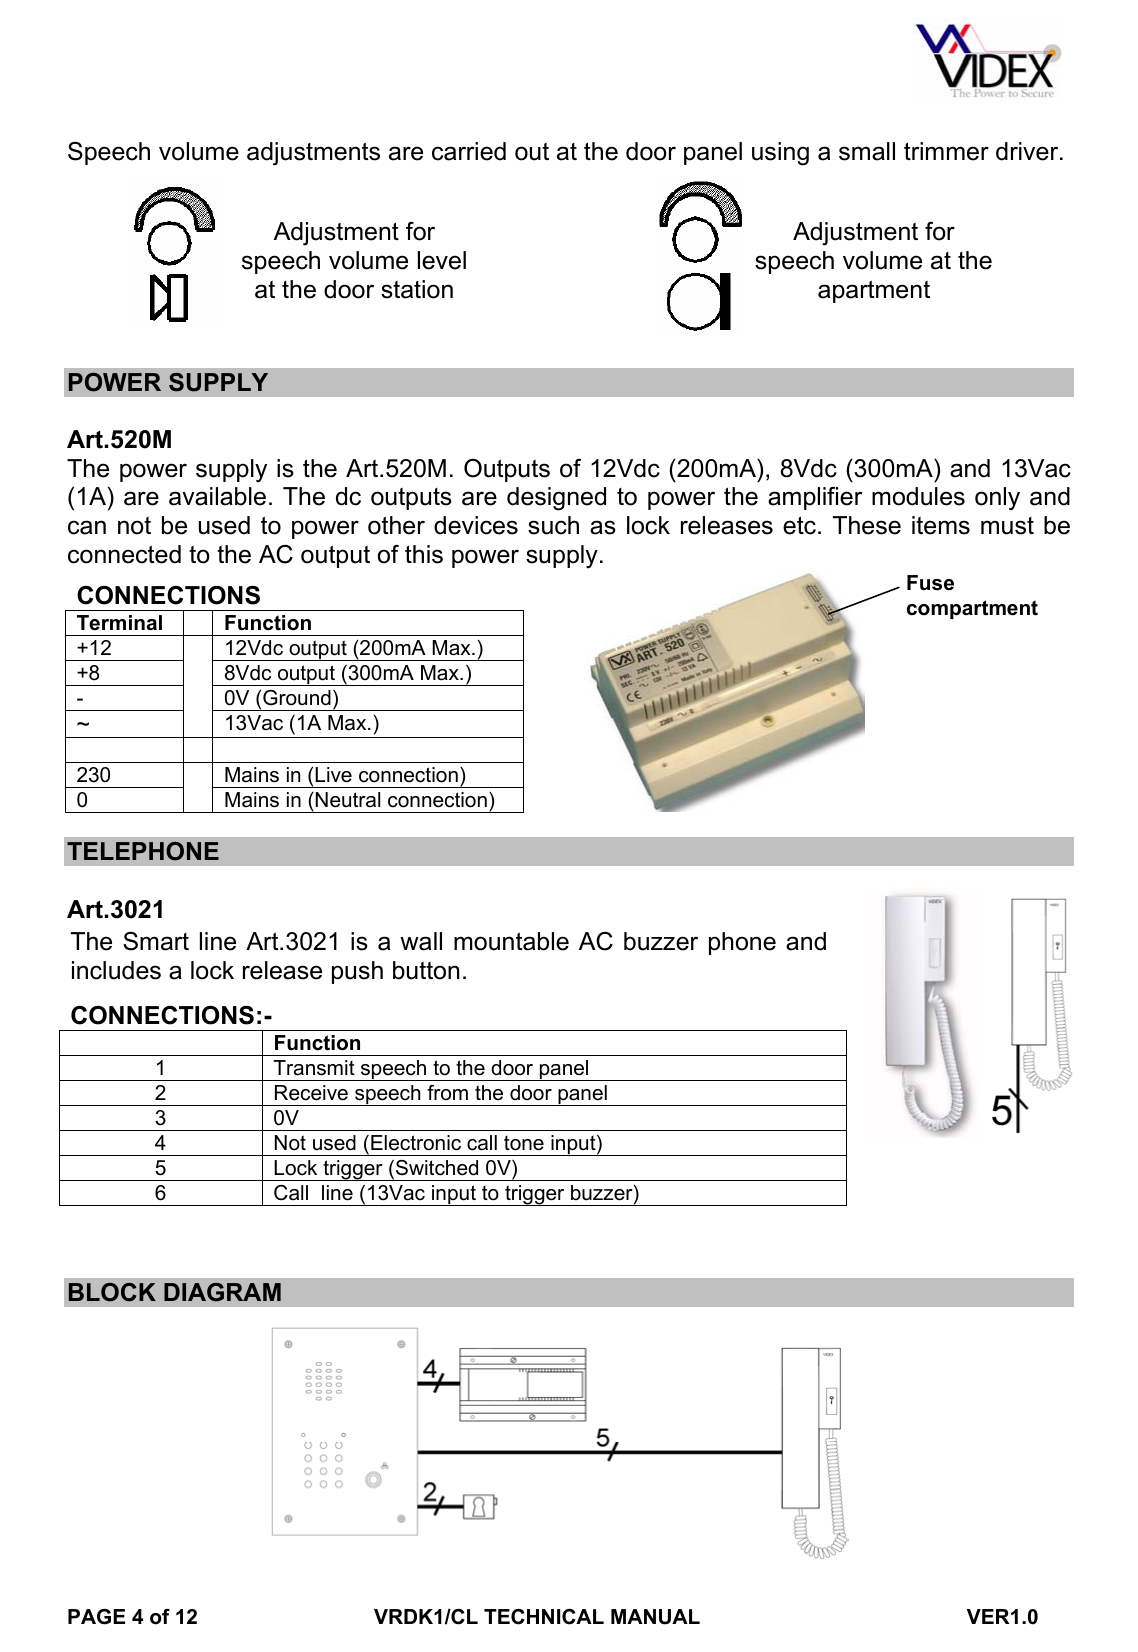 Page 4 of 12 - VRDK1CLManual Videx-VRDK1CL-Manual-with-codelock